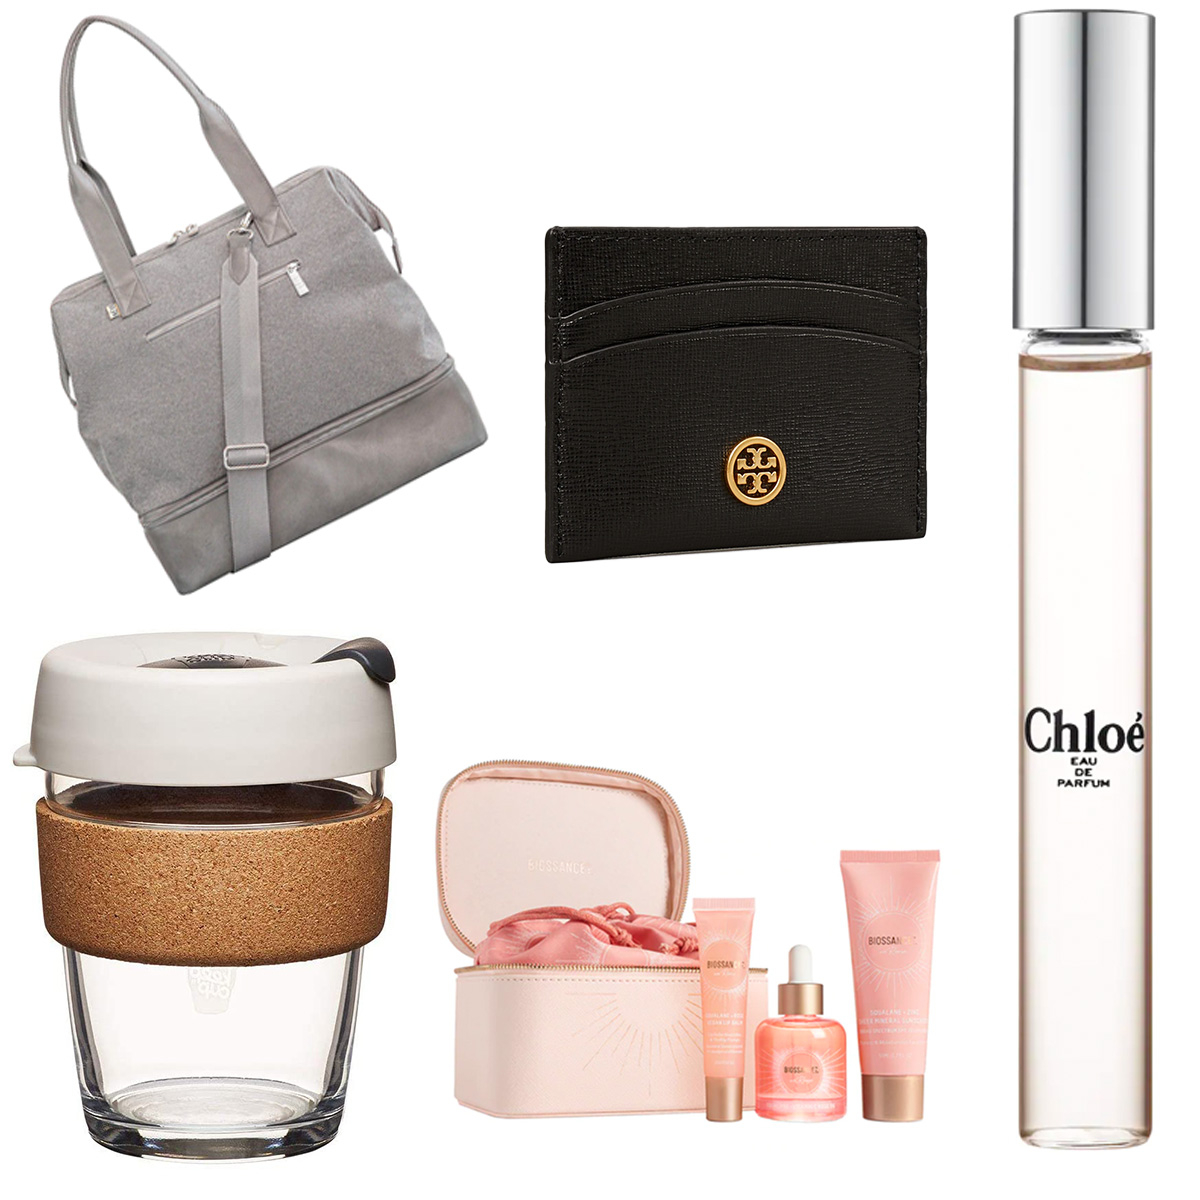 33 of the Best Gifts For Women in Their 30s